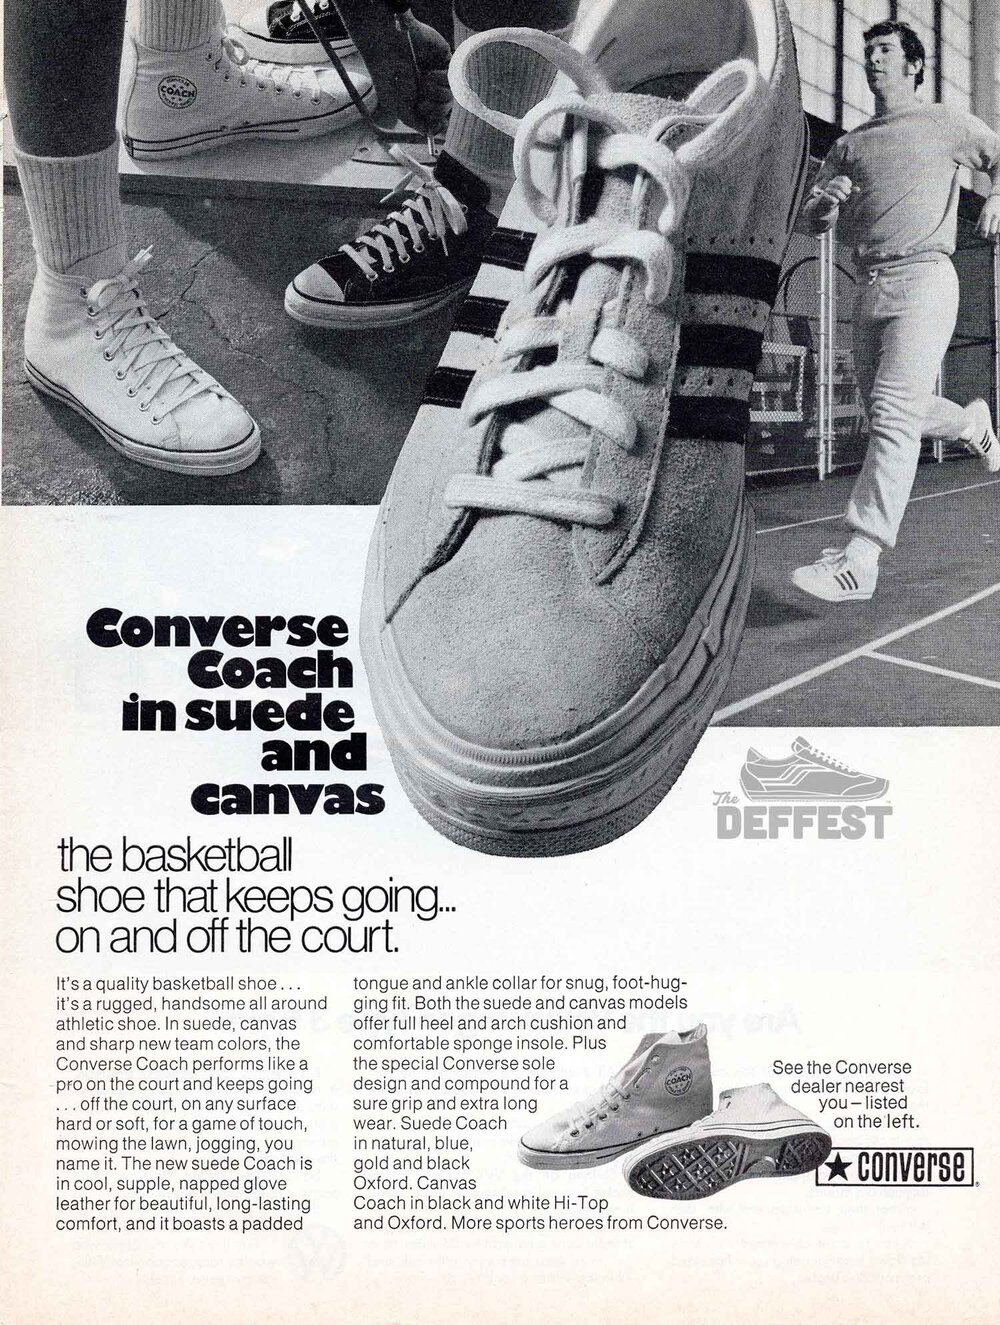 The Deffest®. A vintage and retro sneaker blog. — Converse Coach 3 stripe  vintage sneakers ad from 1972